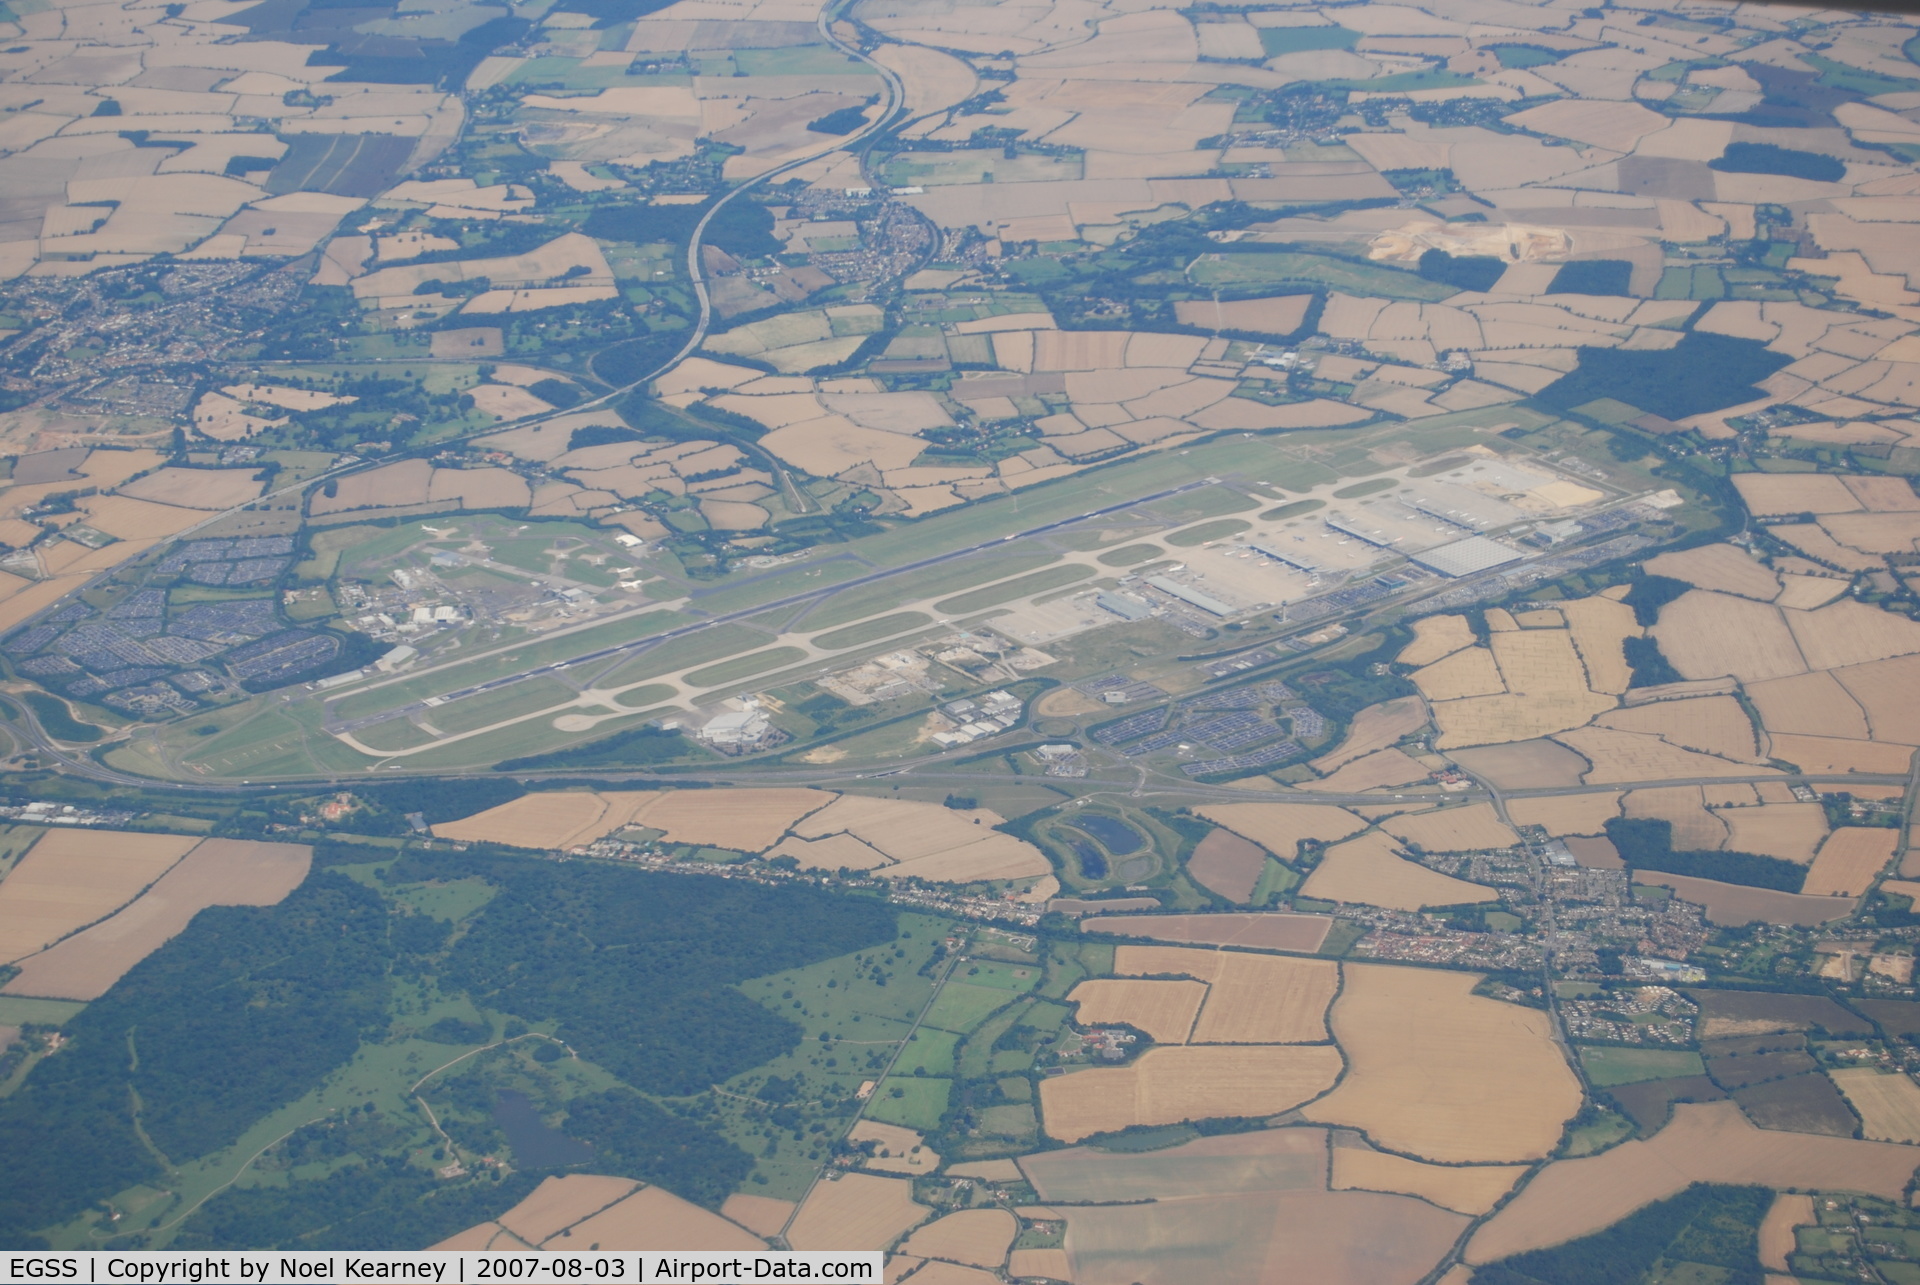 London Stansted Airport, London, England United Kingdom (EGSS) - Overhead EGSS while on route EGGW - EHAM